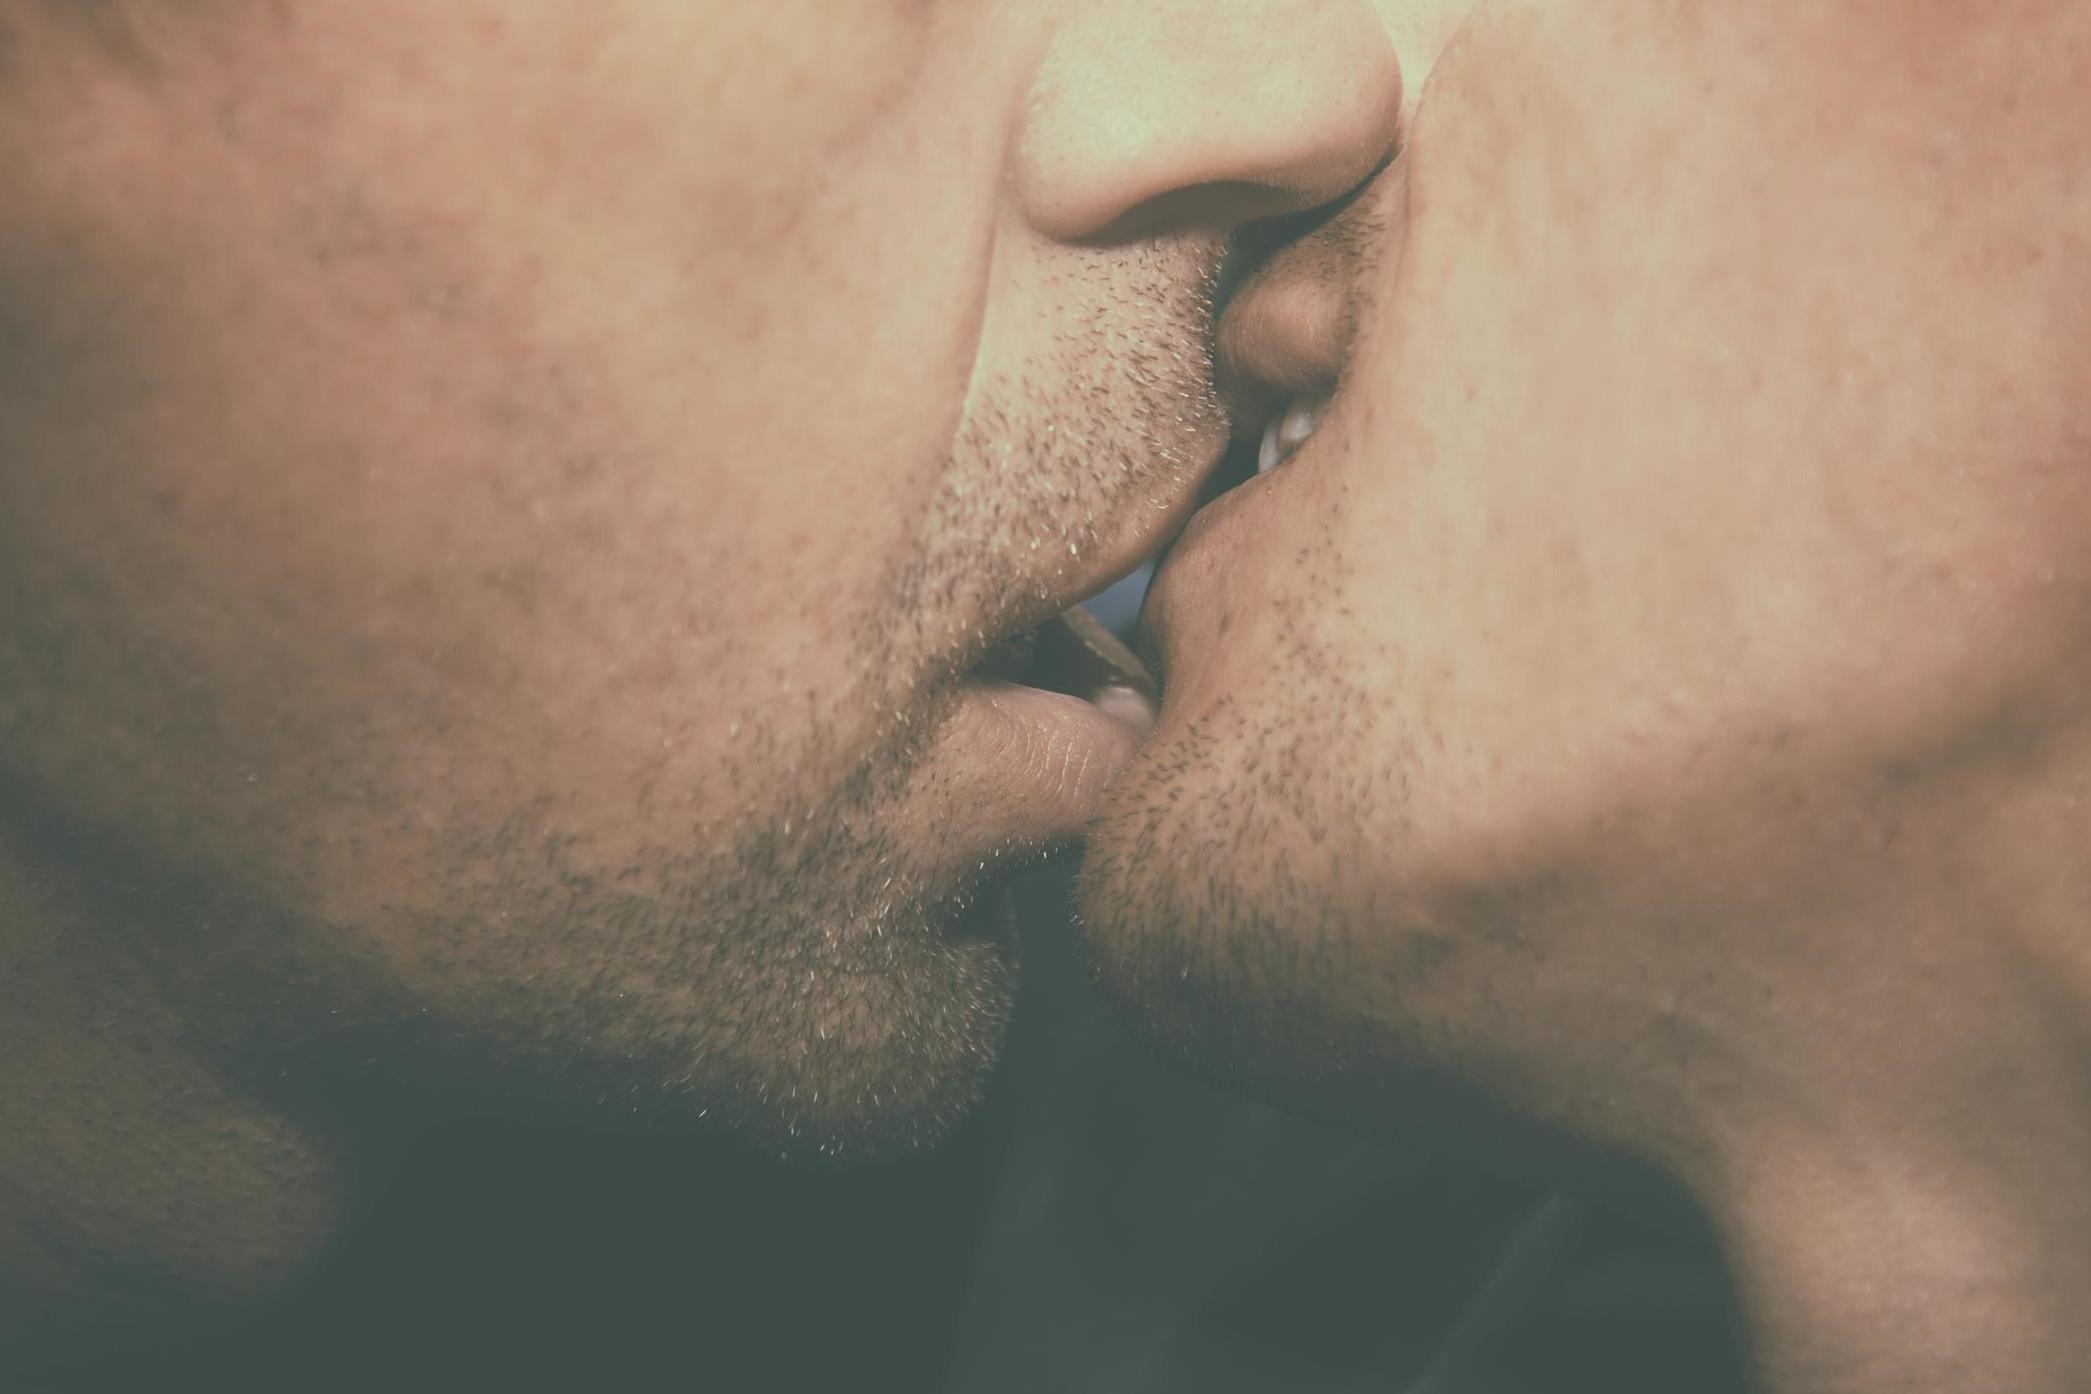 2091px x 1394px - French kissing could be unexplored cause of throat gonorrhea | The ...